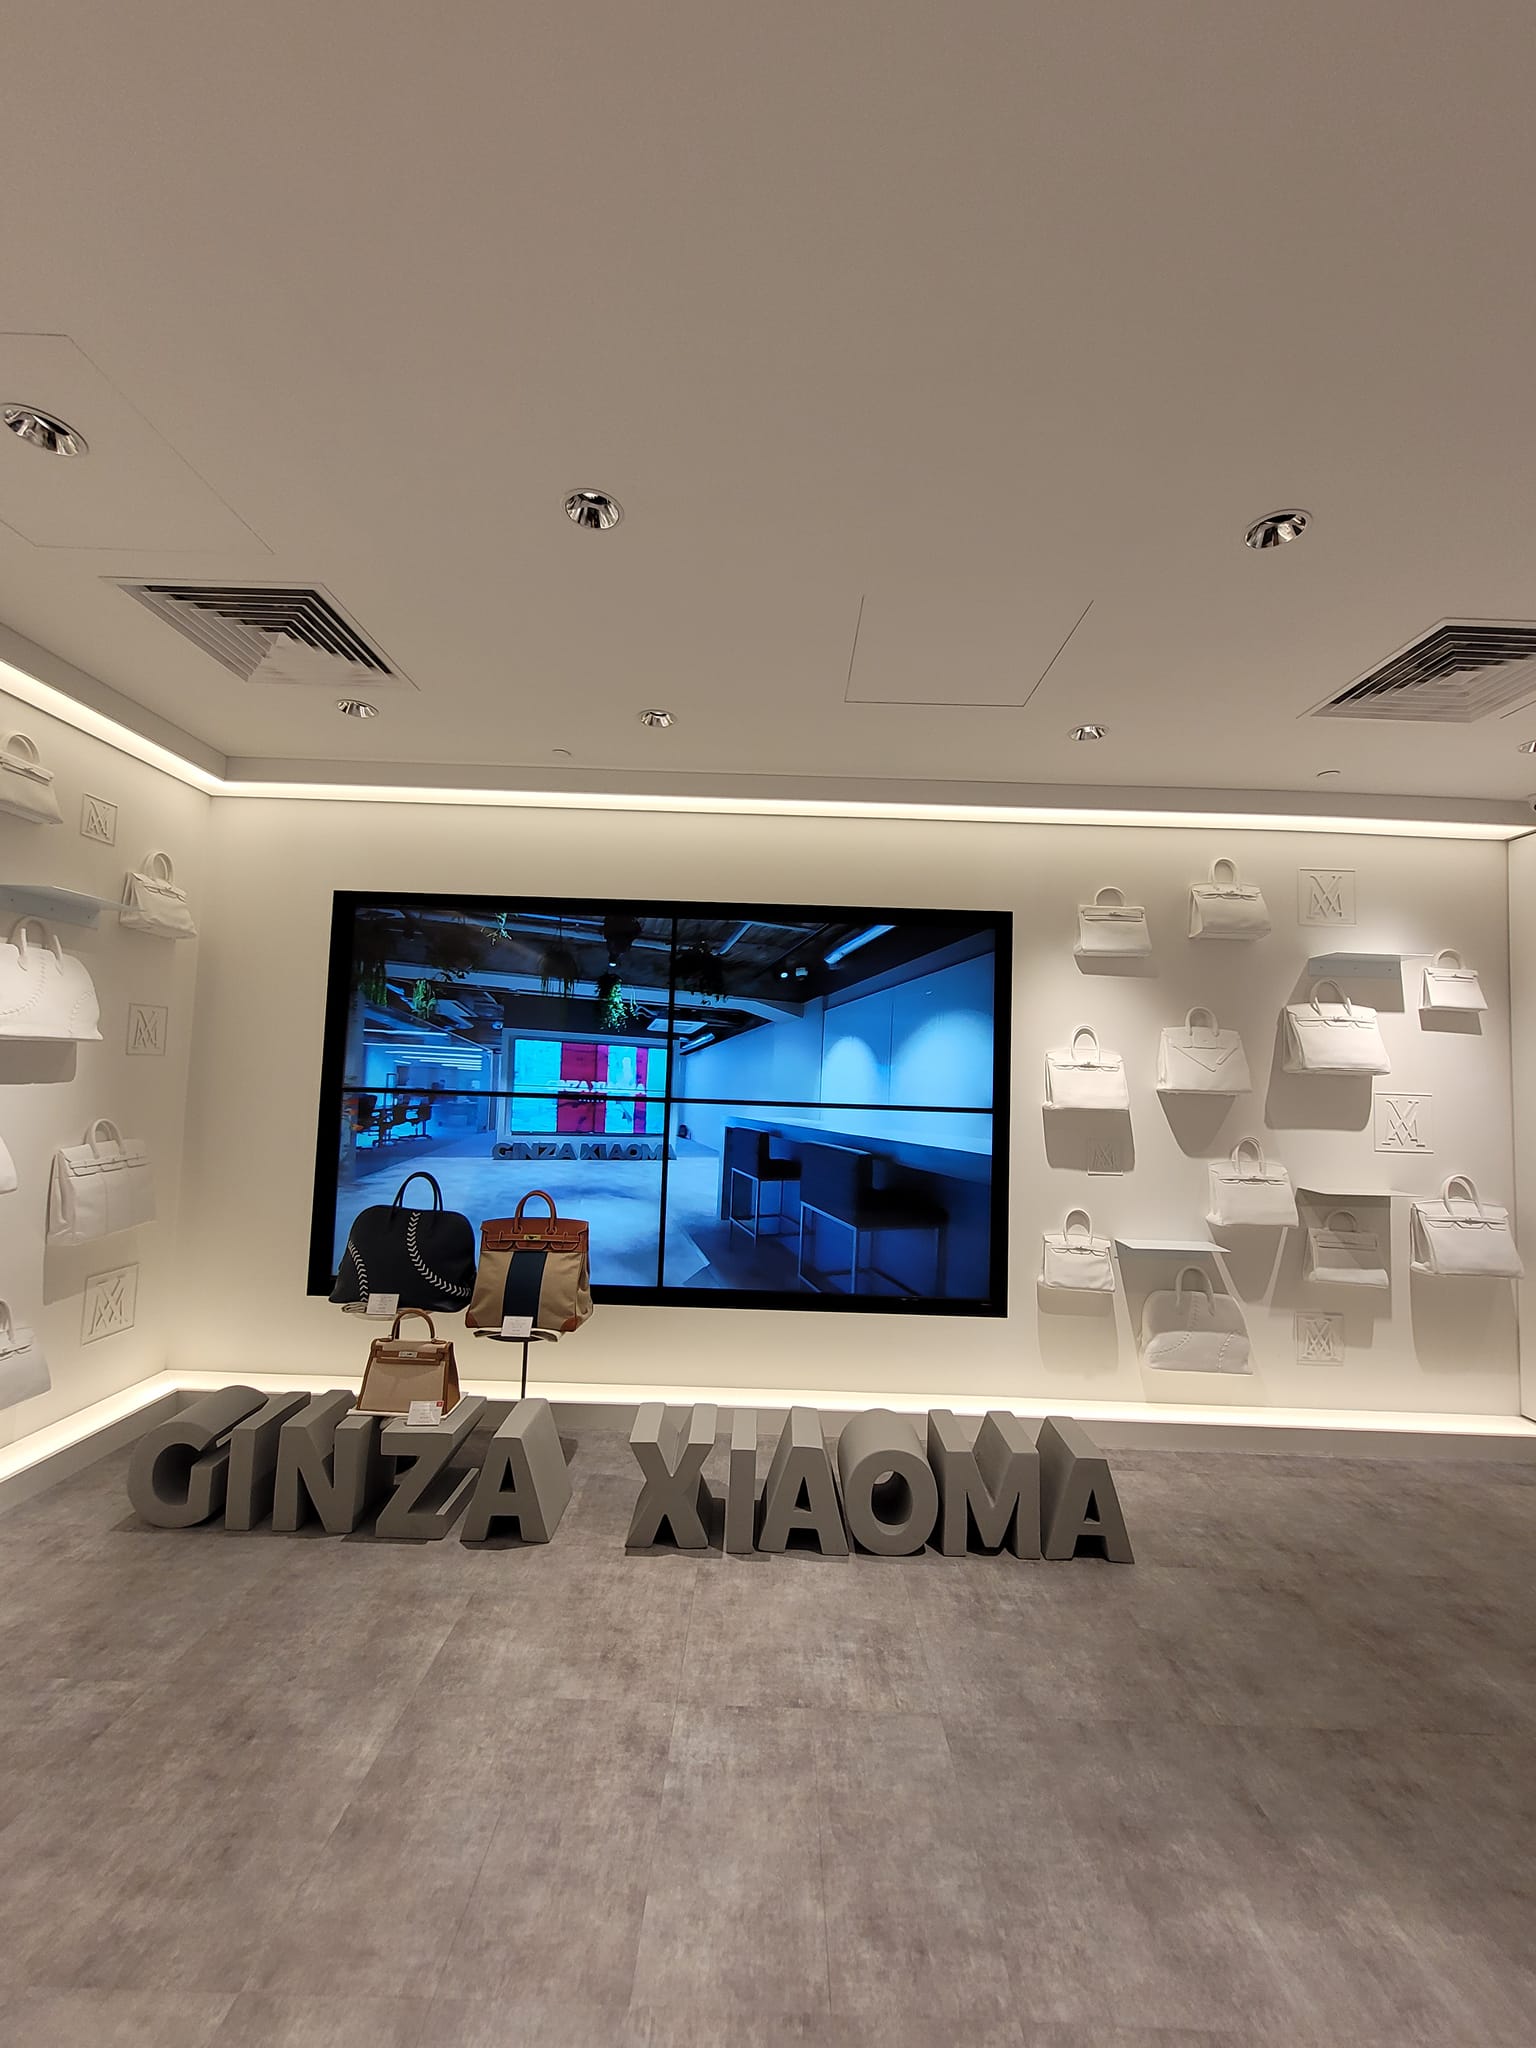 GINZA XIAOMA  Singapore on Instagram: Get that new style